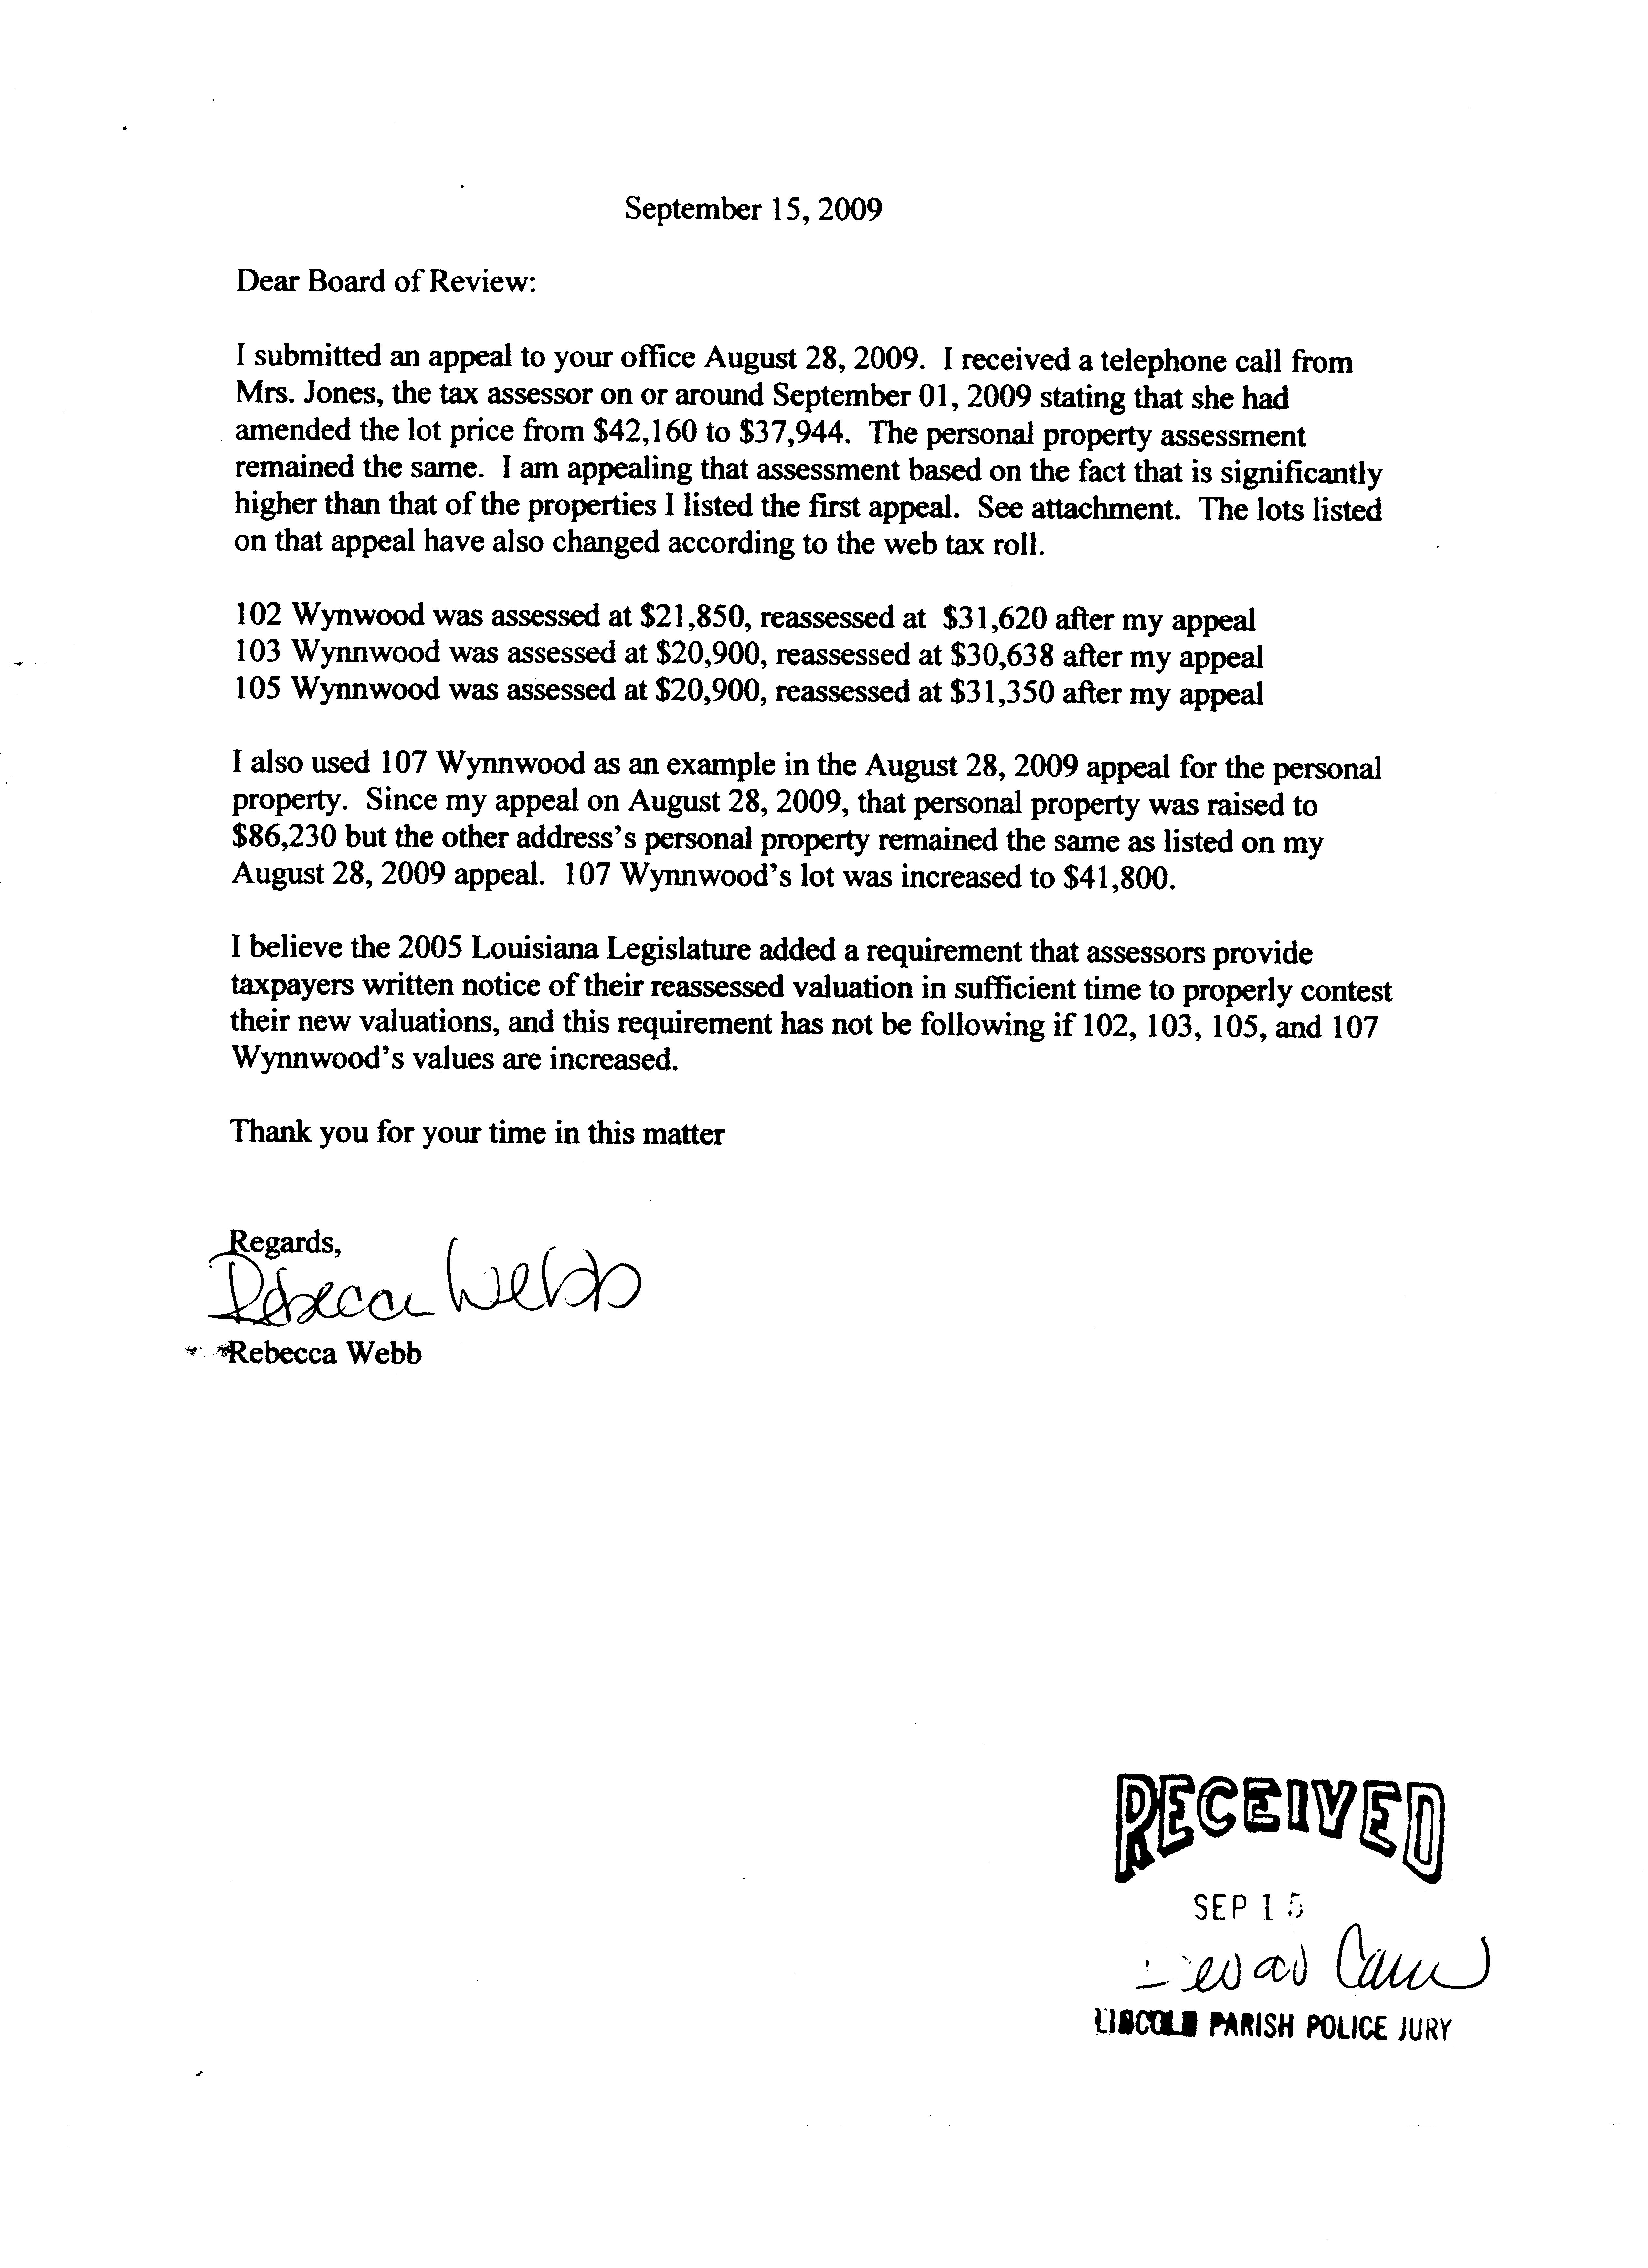 Property Tax Appeal Letter Template - How to Write A Letter Appeal Sample Letter format formal